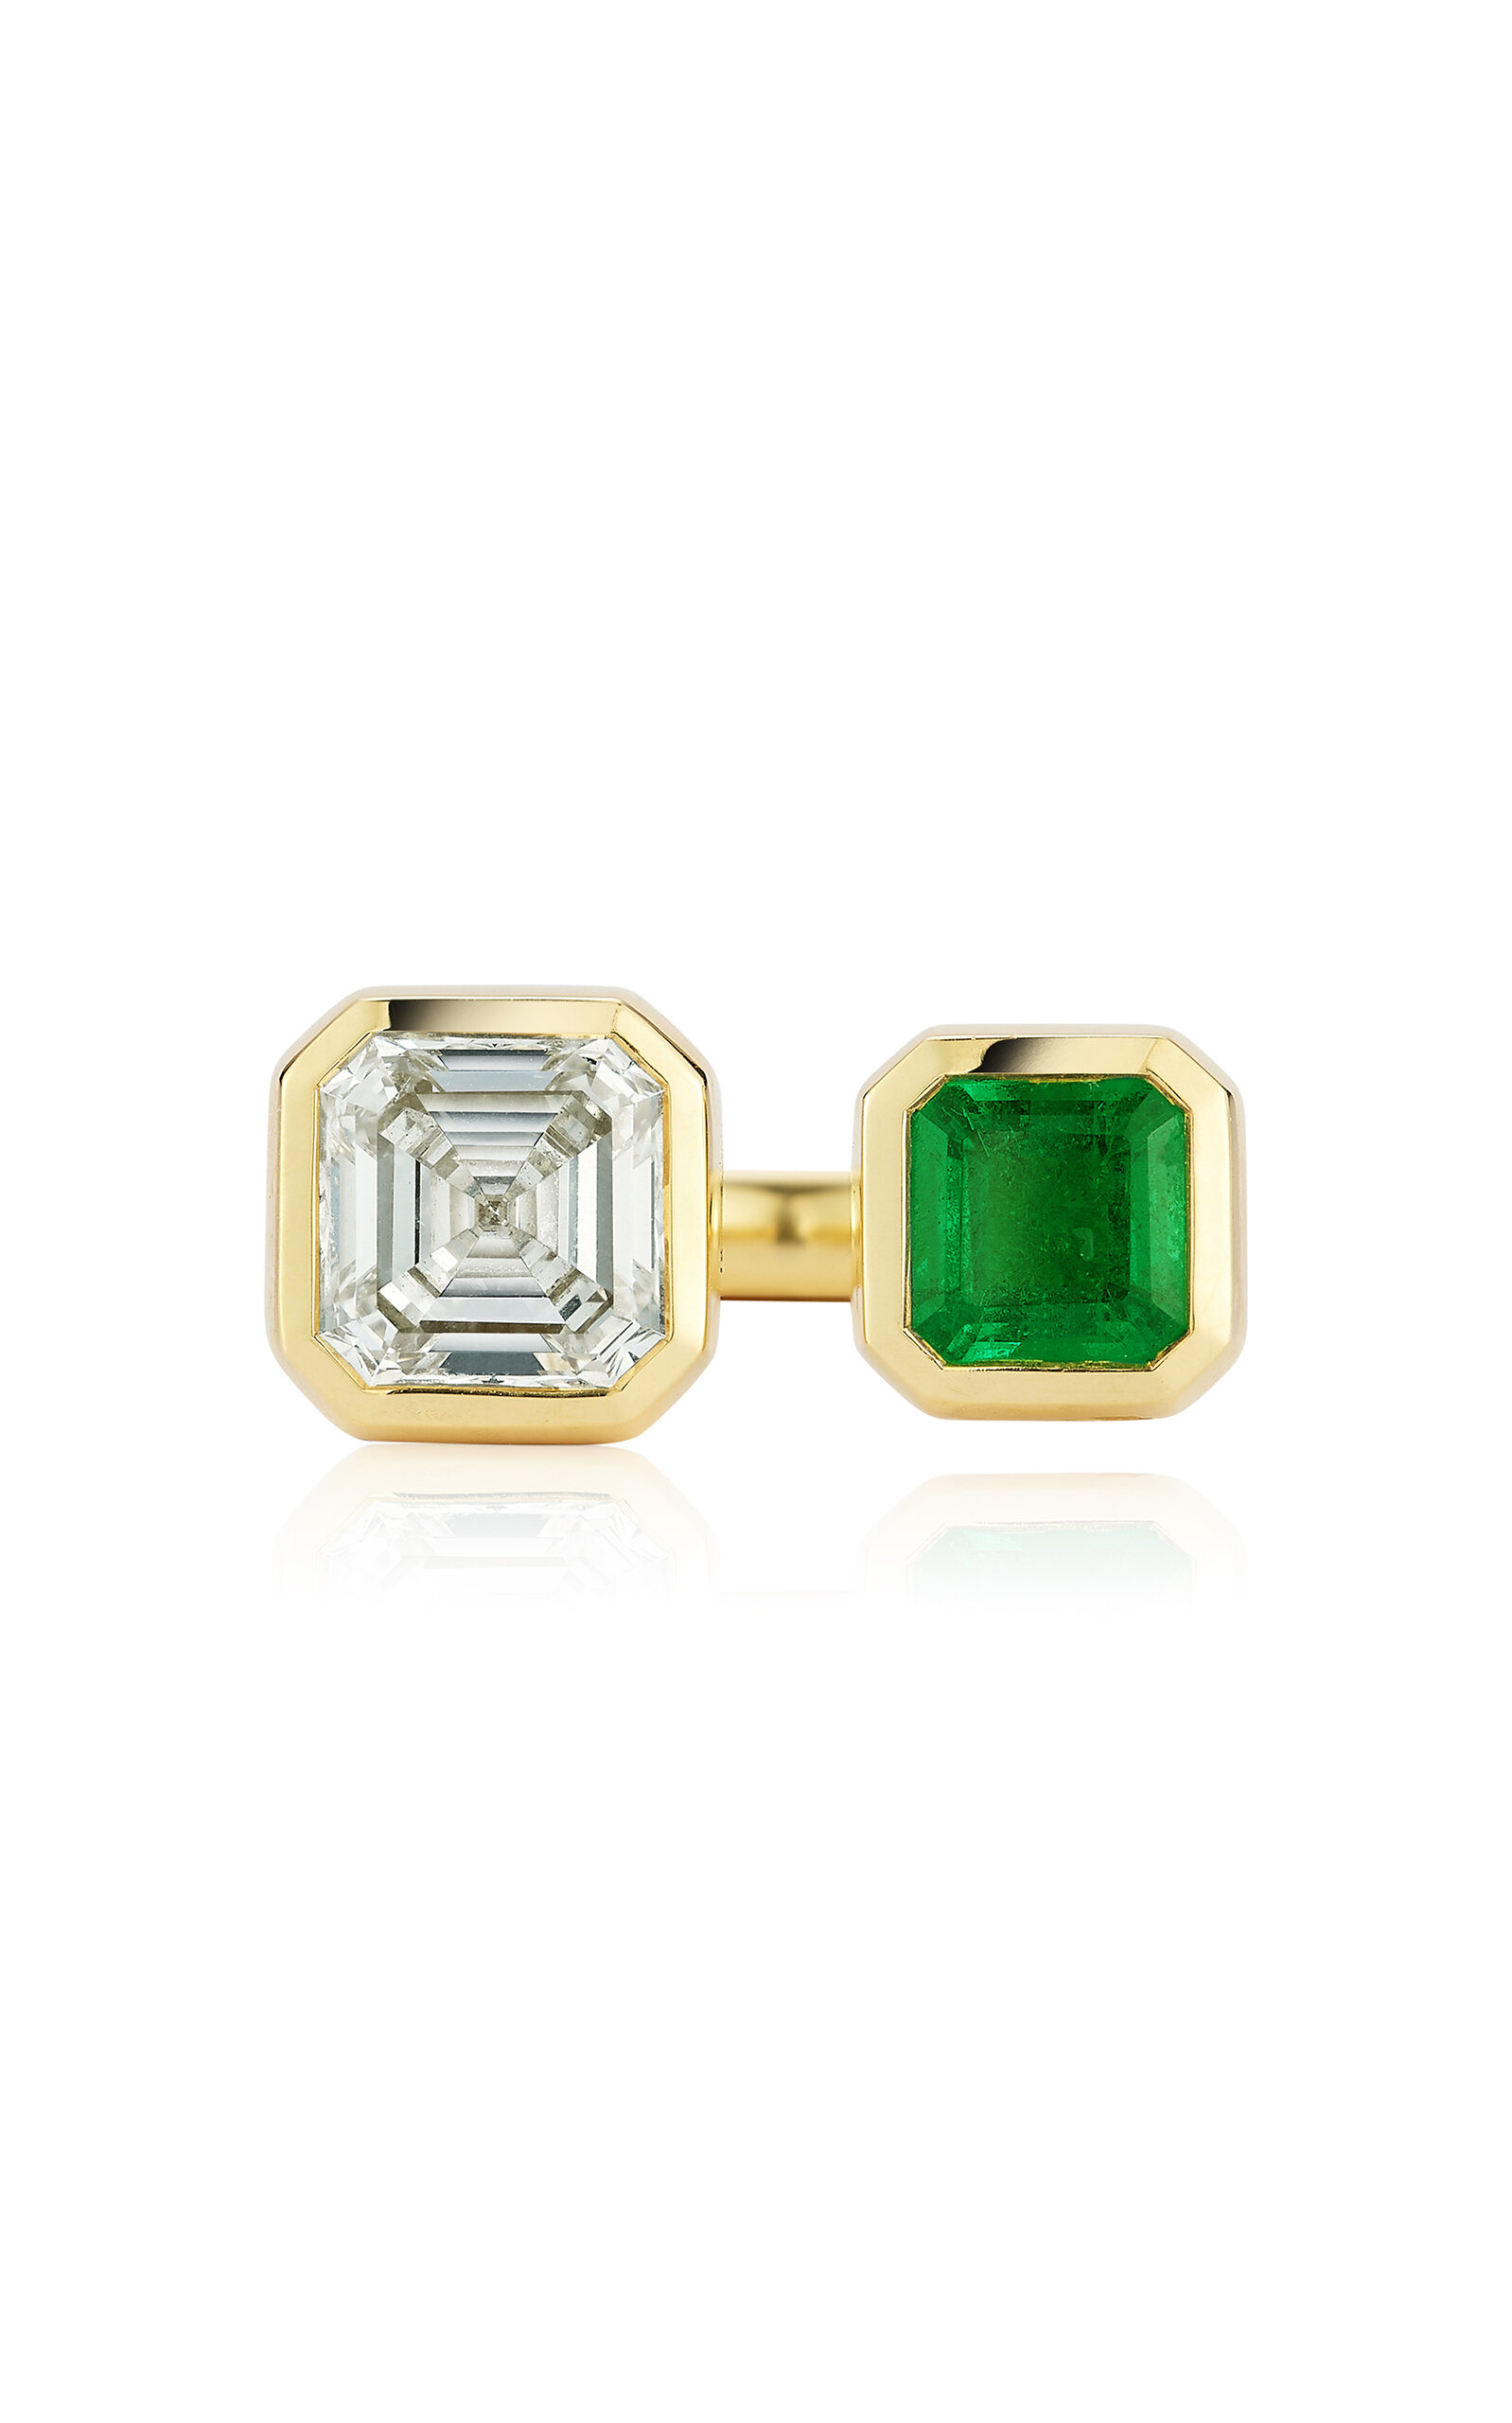 18k Yellow Gold Prive Luxe Emerald and Diamond Asscher Ring